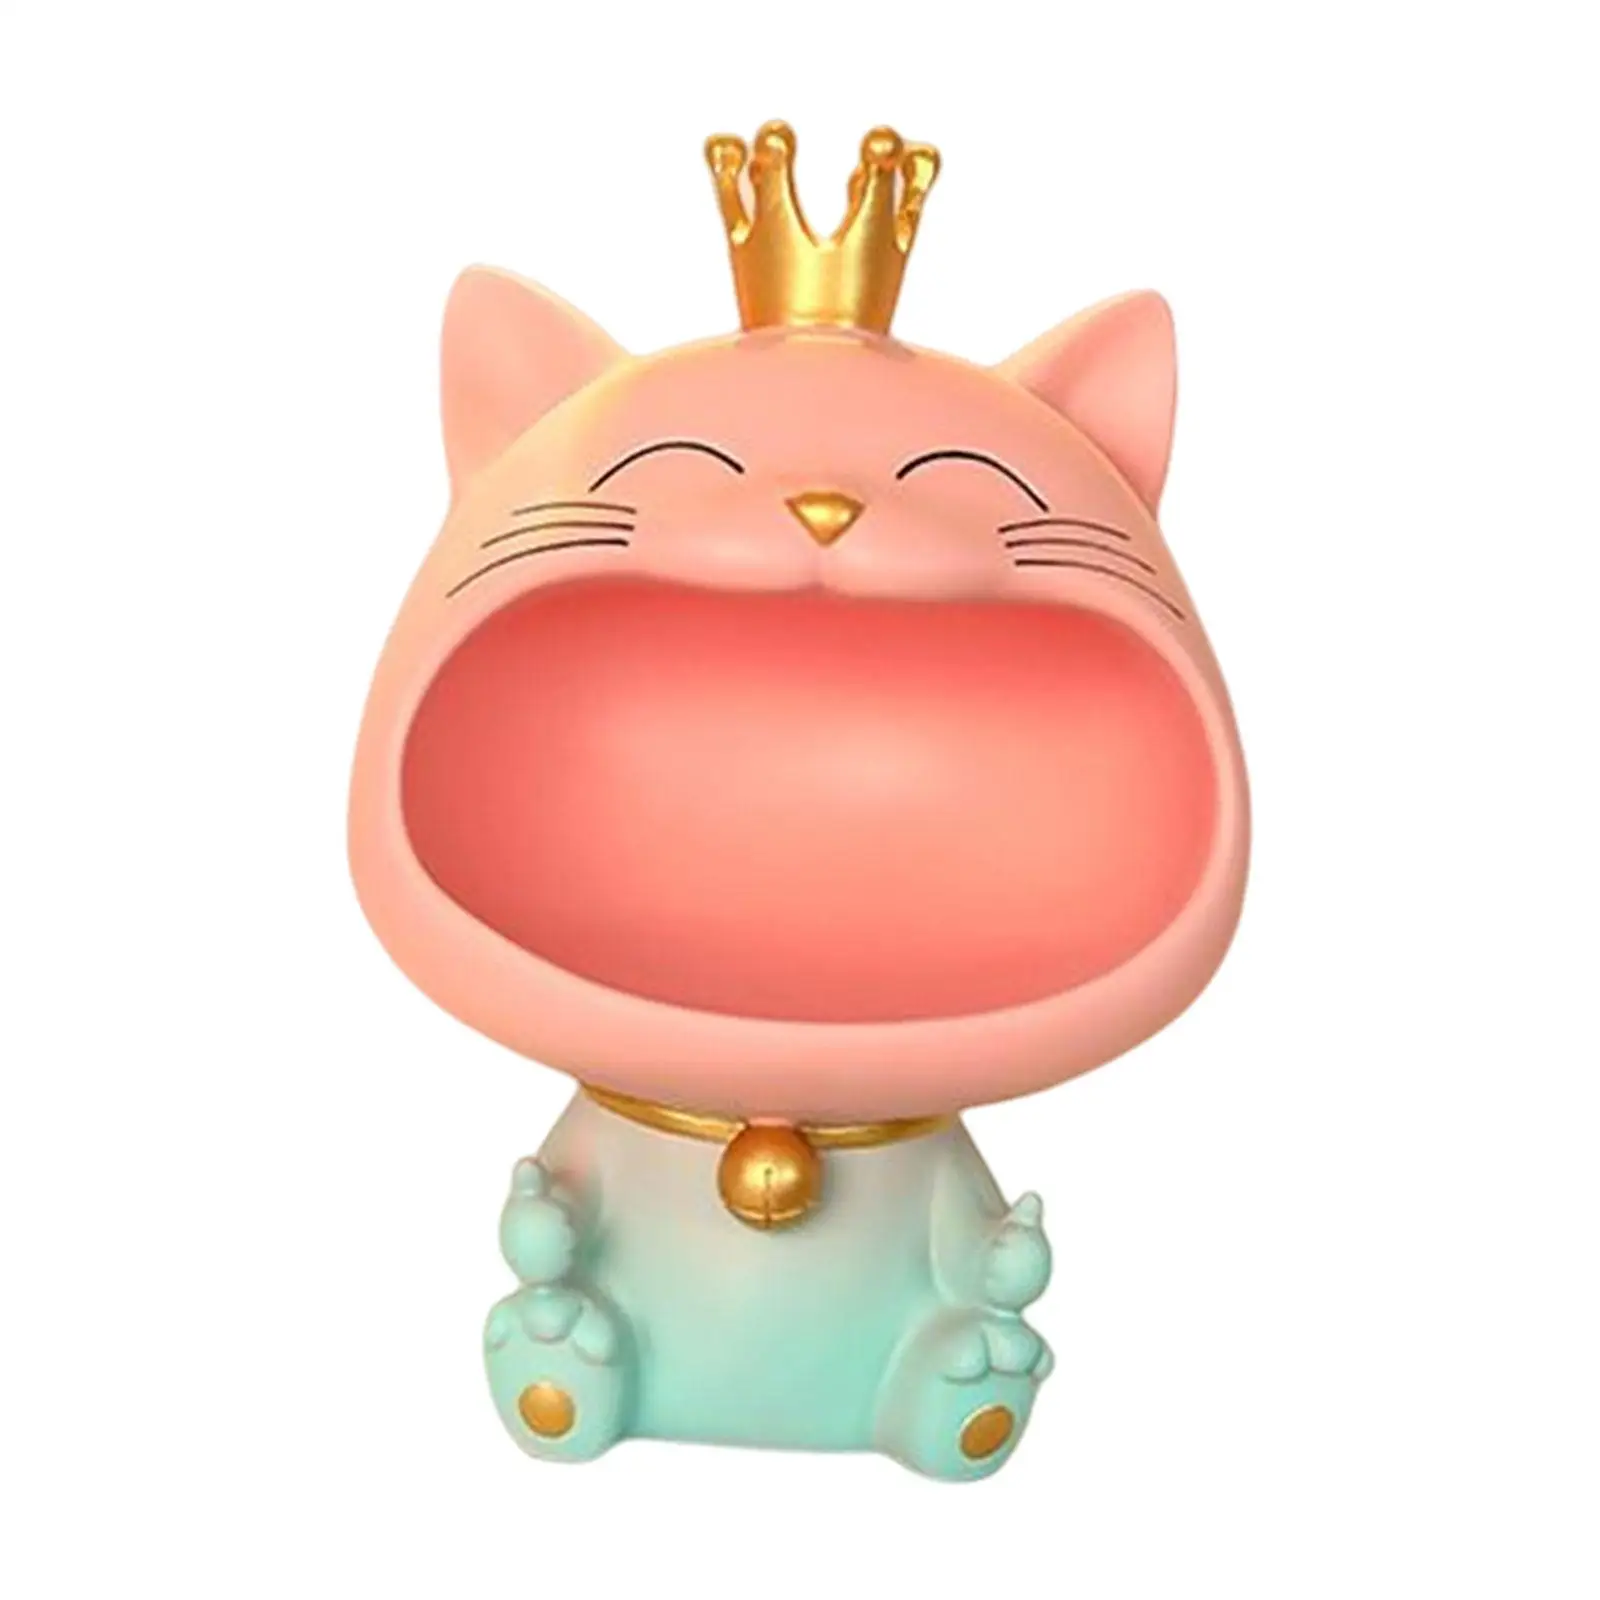 Cat Figurine Storage Box Ornament Creative Resin Sculpture Snack Holder for Living Room Table Home Entryway Decoration